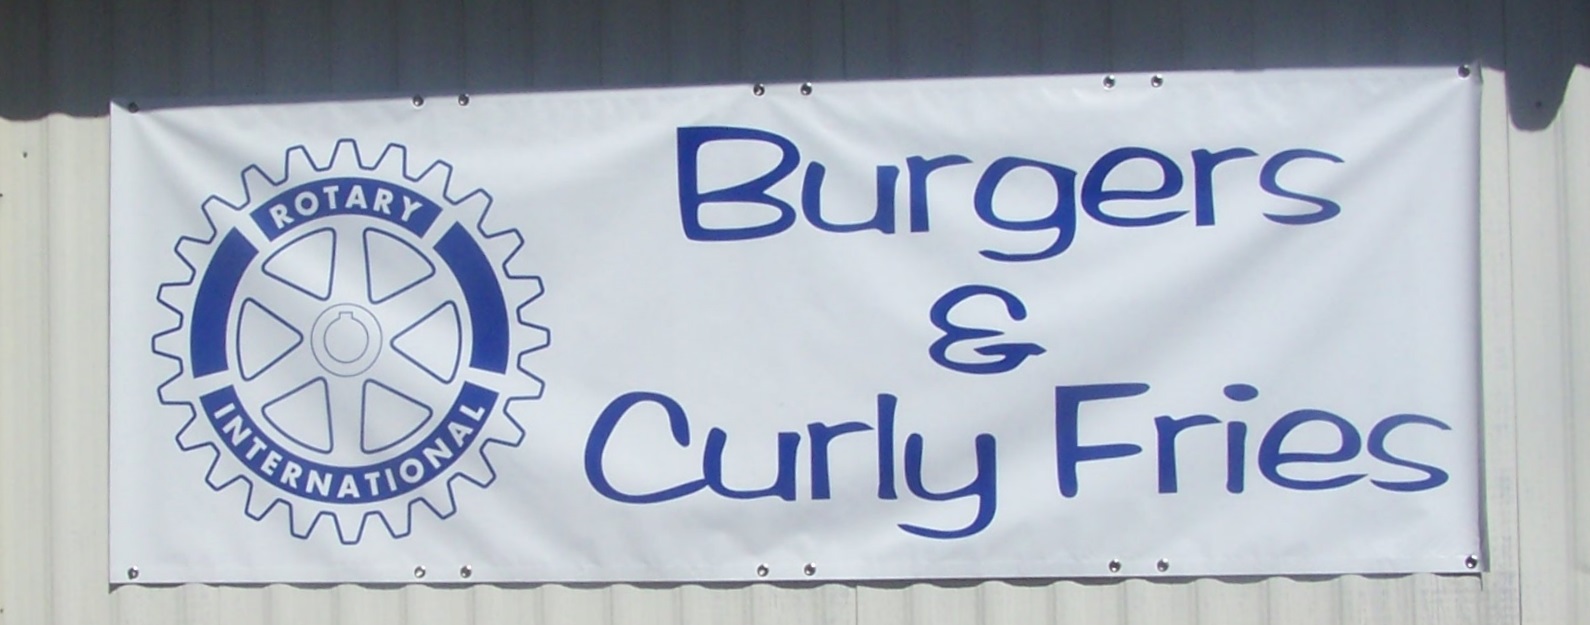 Burgers & Curly Fries Banner by Bason Signs